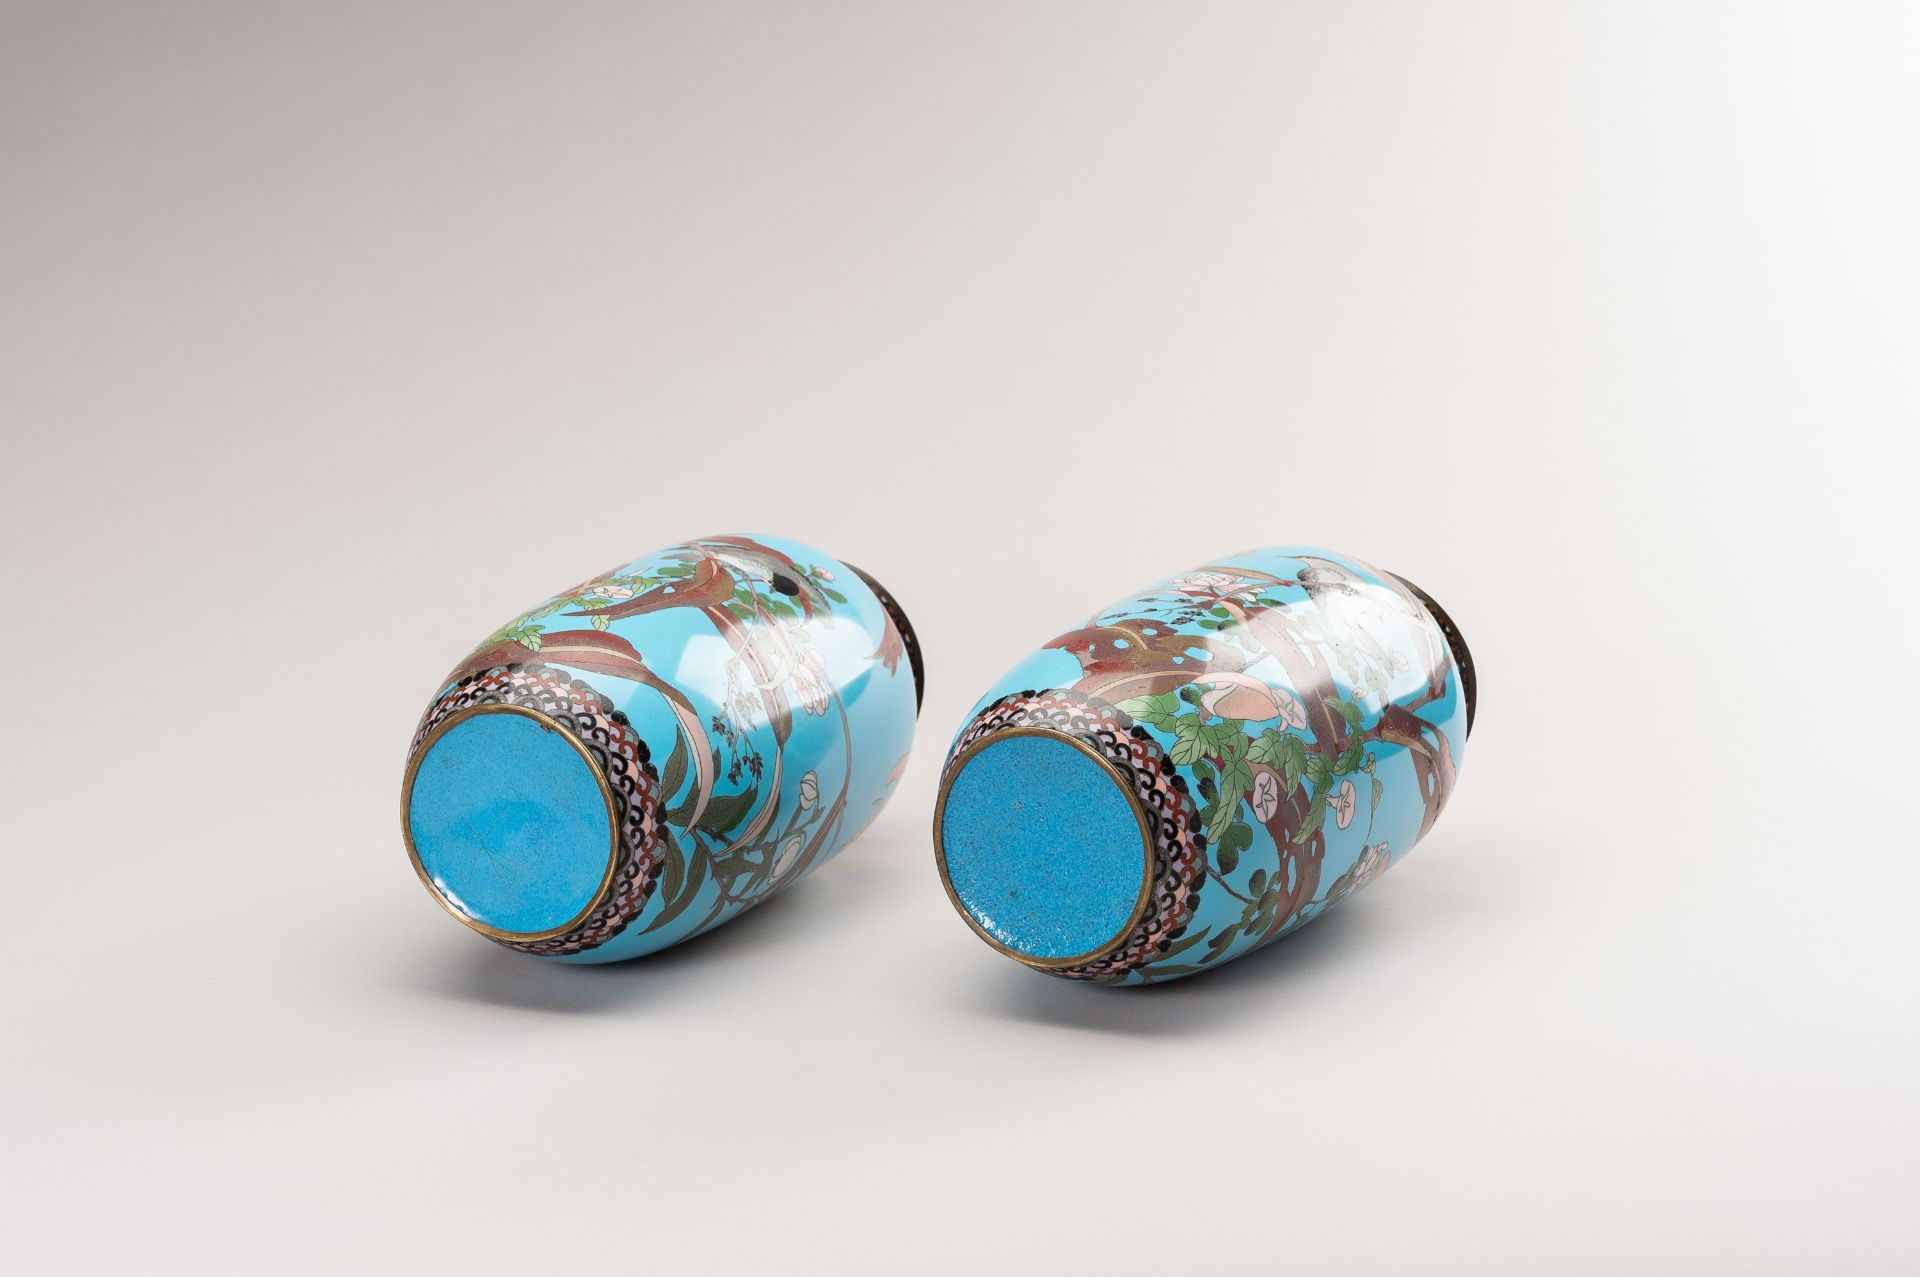 A PAIR OF TWO CLOISONNE VASES WITH BIRDS AND FLOWERS - Image 11 of 11